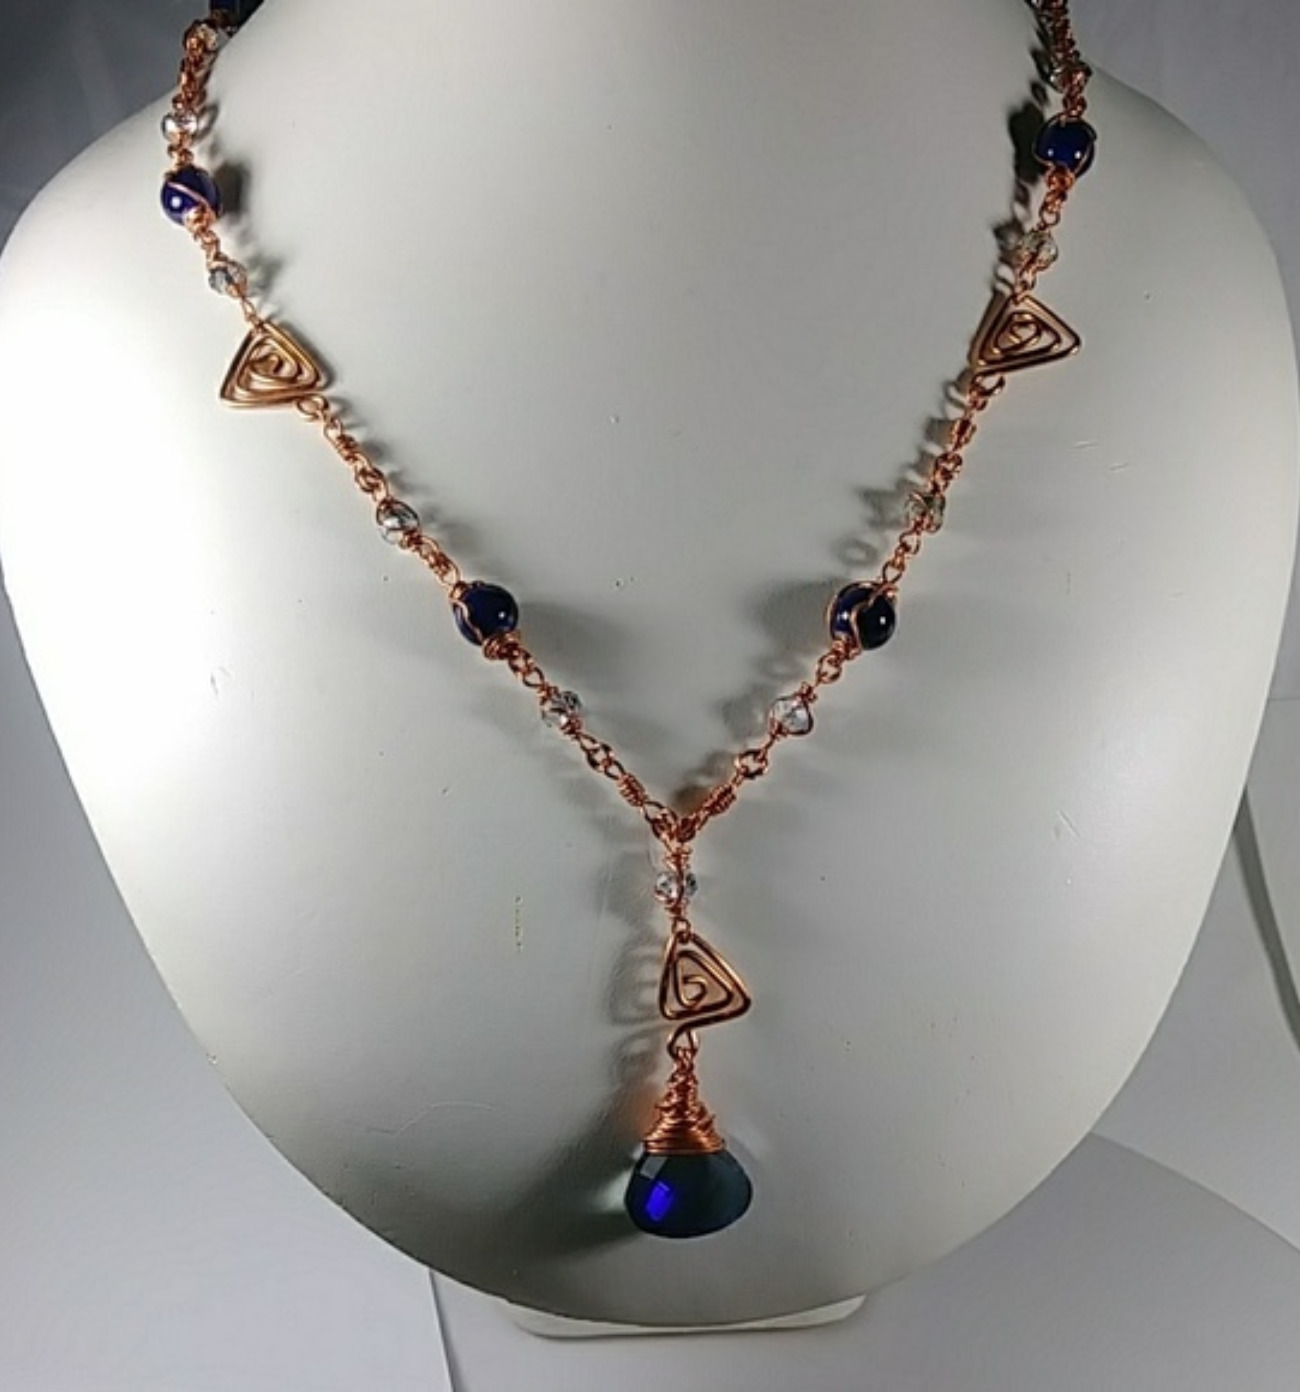 (303 -NCK) - Description: Copper Wire and Lapis Glass Beads Faceted Glass Beads). Hook Closure - Dimension: 29 Inches (L)